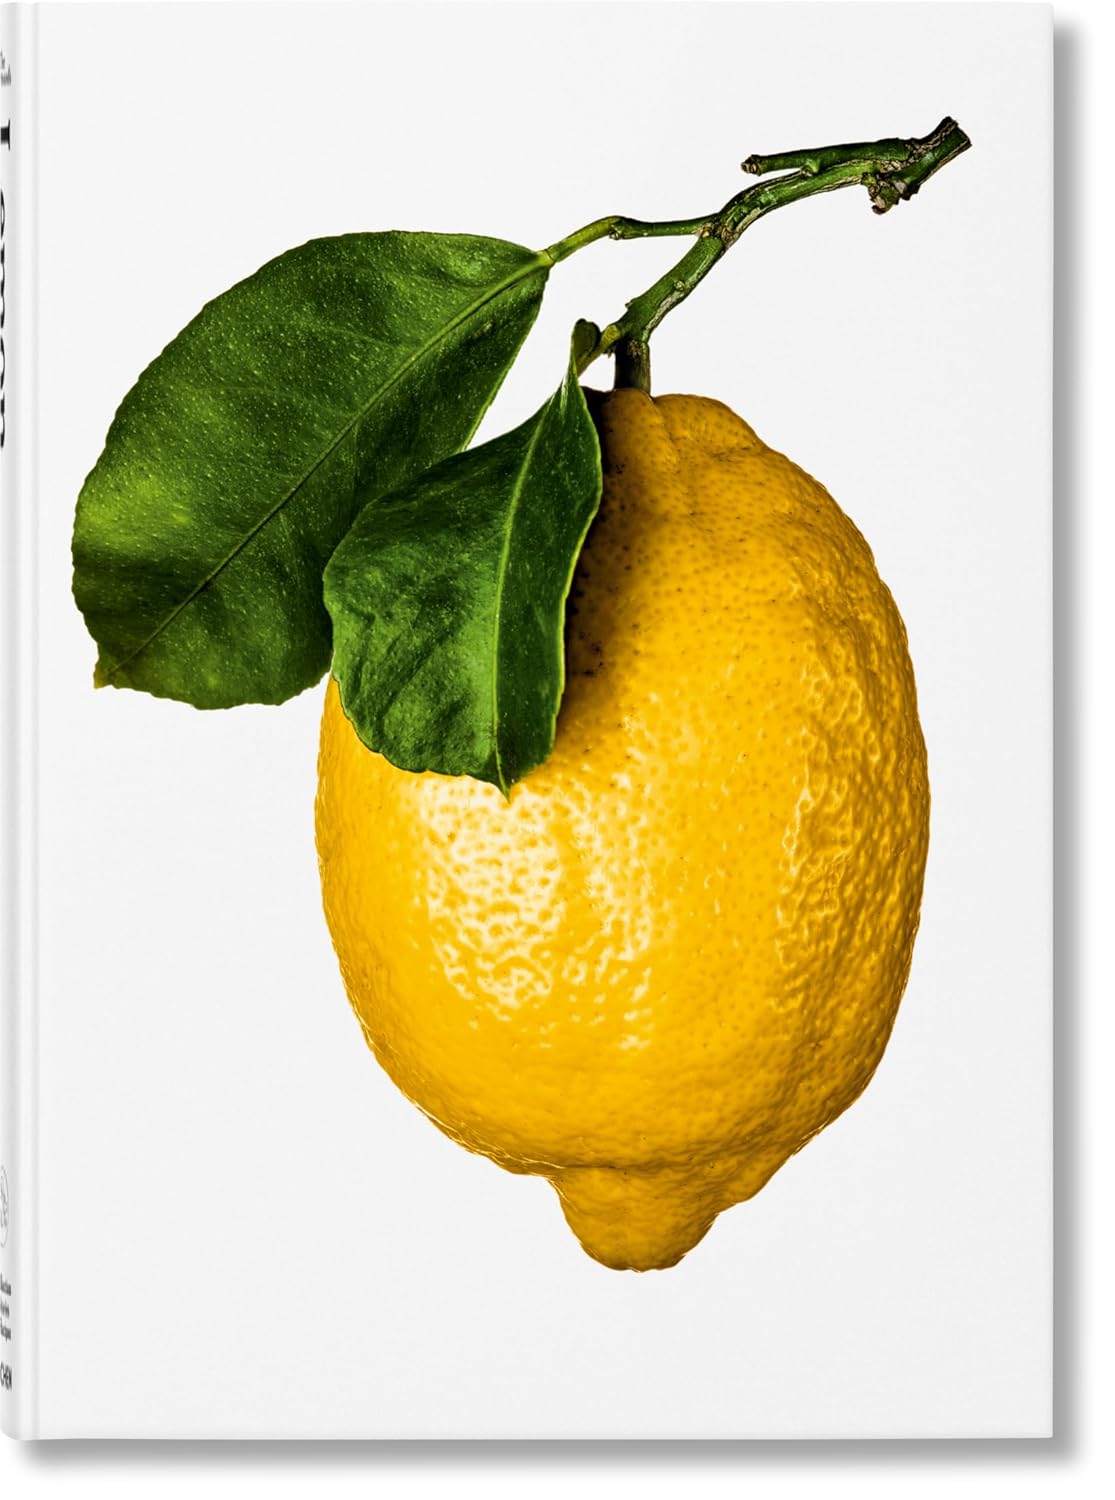 The Gourmand's Lemon: A Collection of Stories and Recipes